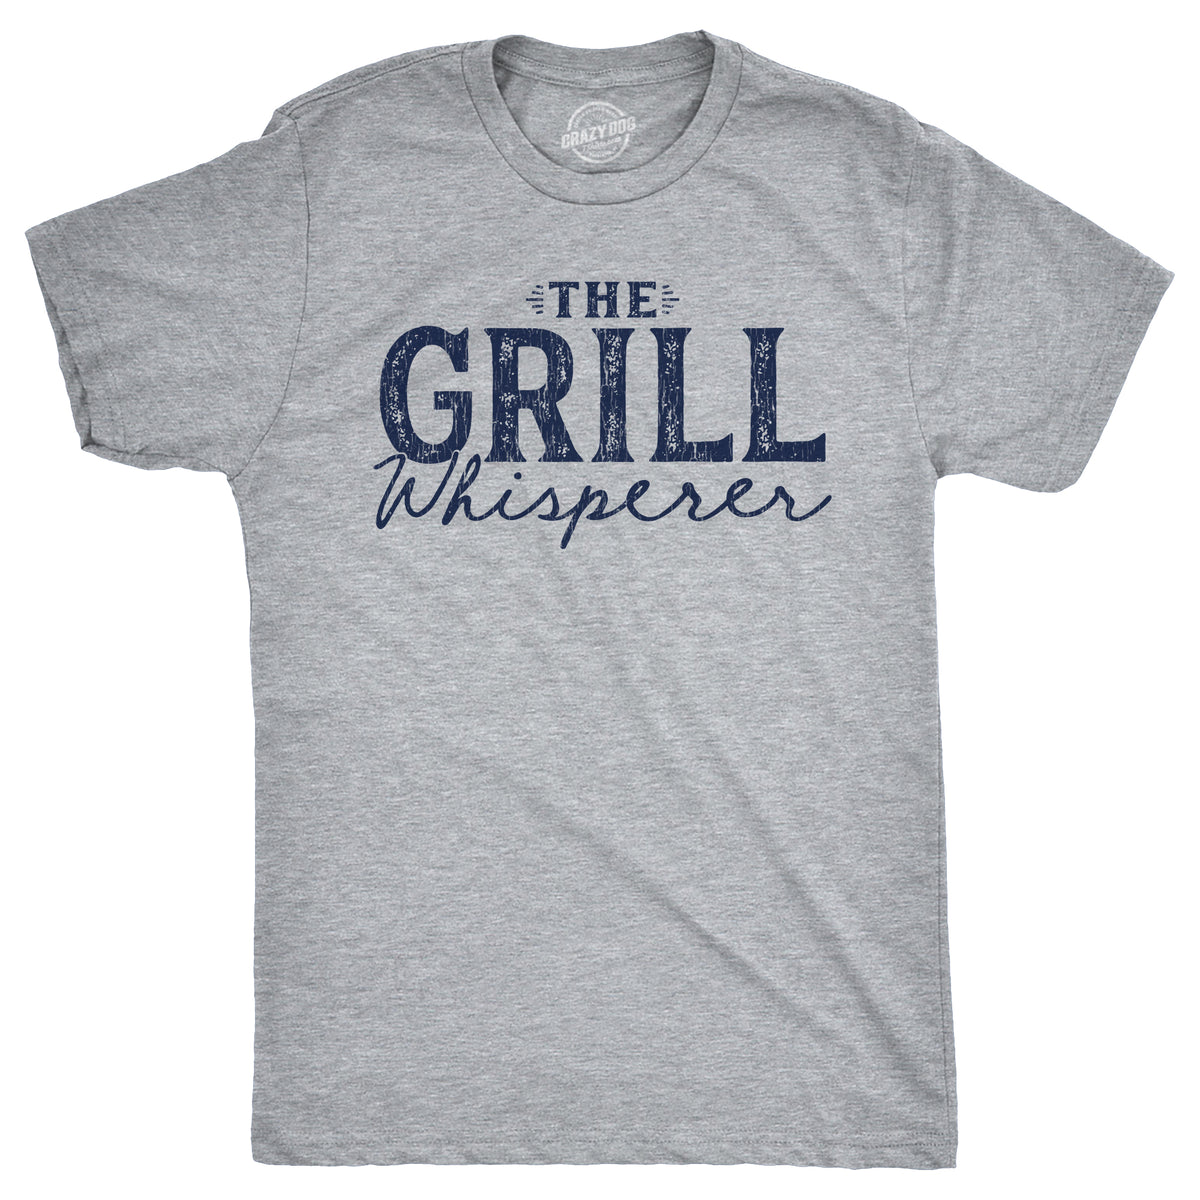 Funny Light Heather Grey - GRILL The Grill Whisperer Mens T Shirt Nerdy Food sarcastic Tee